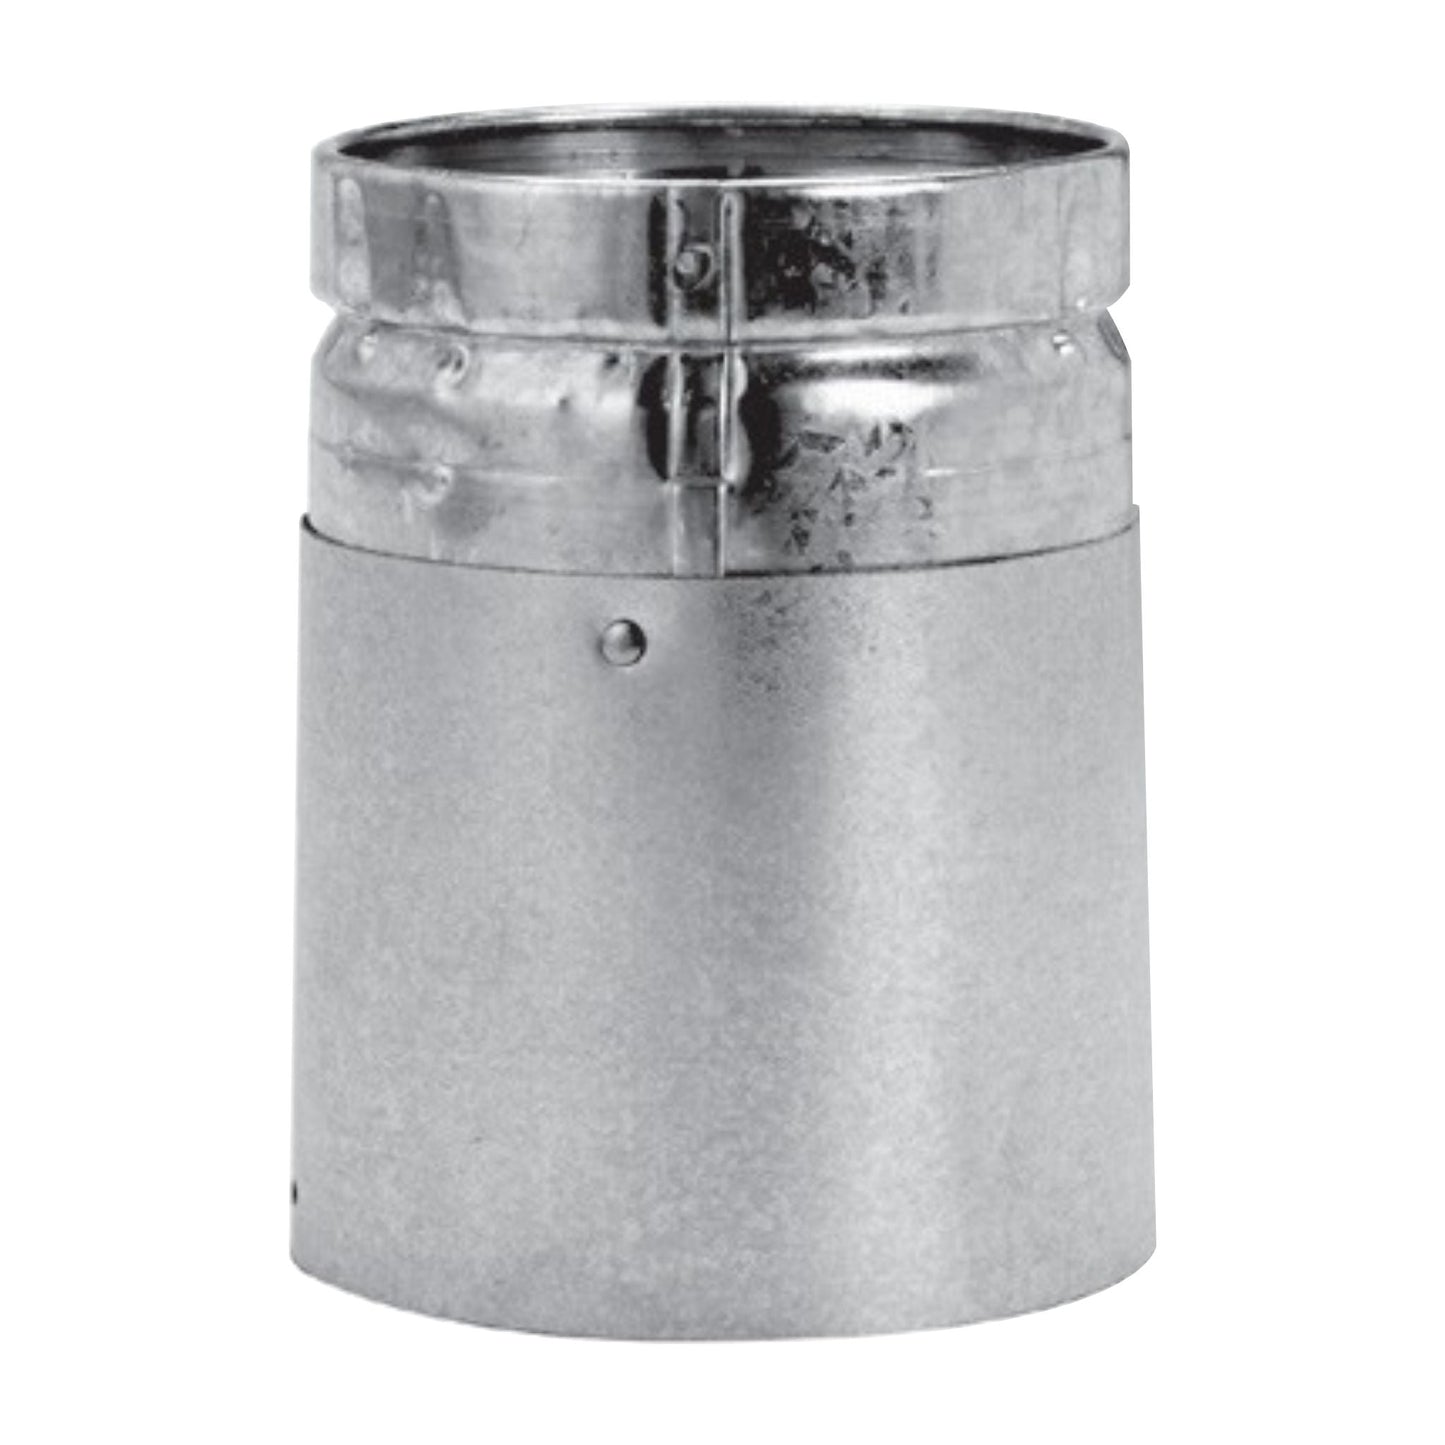 DuraVent Round Type B Gas Vent Model BV 12" Universal Male Adapter